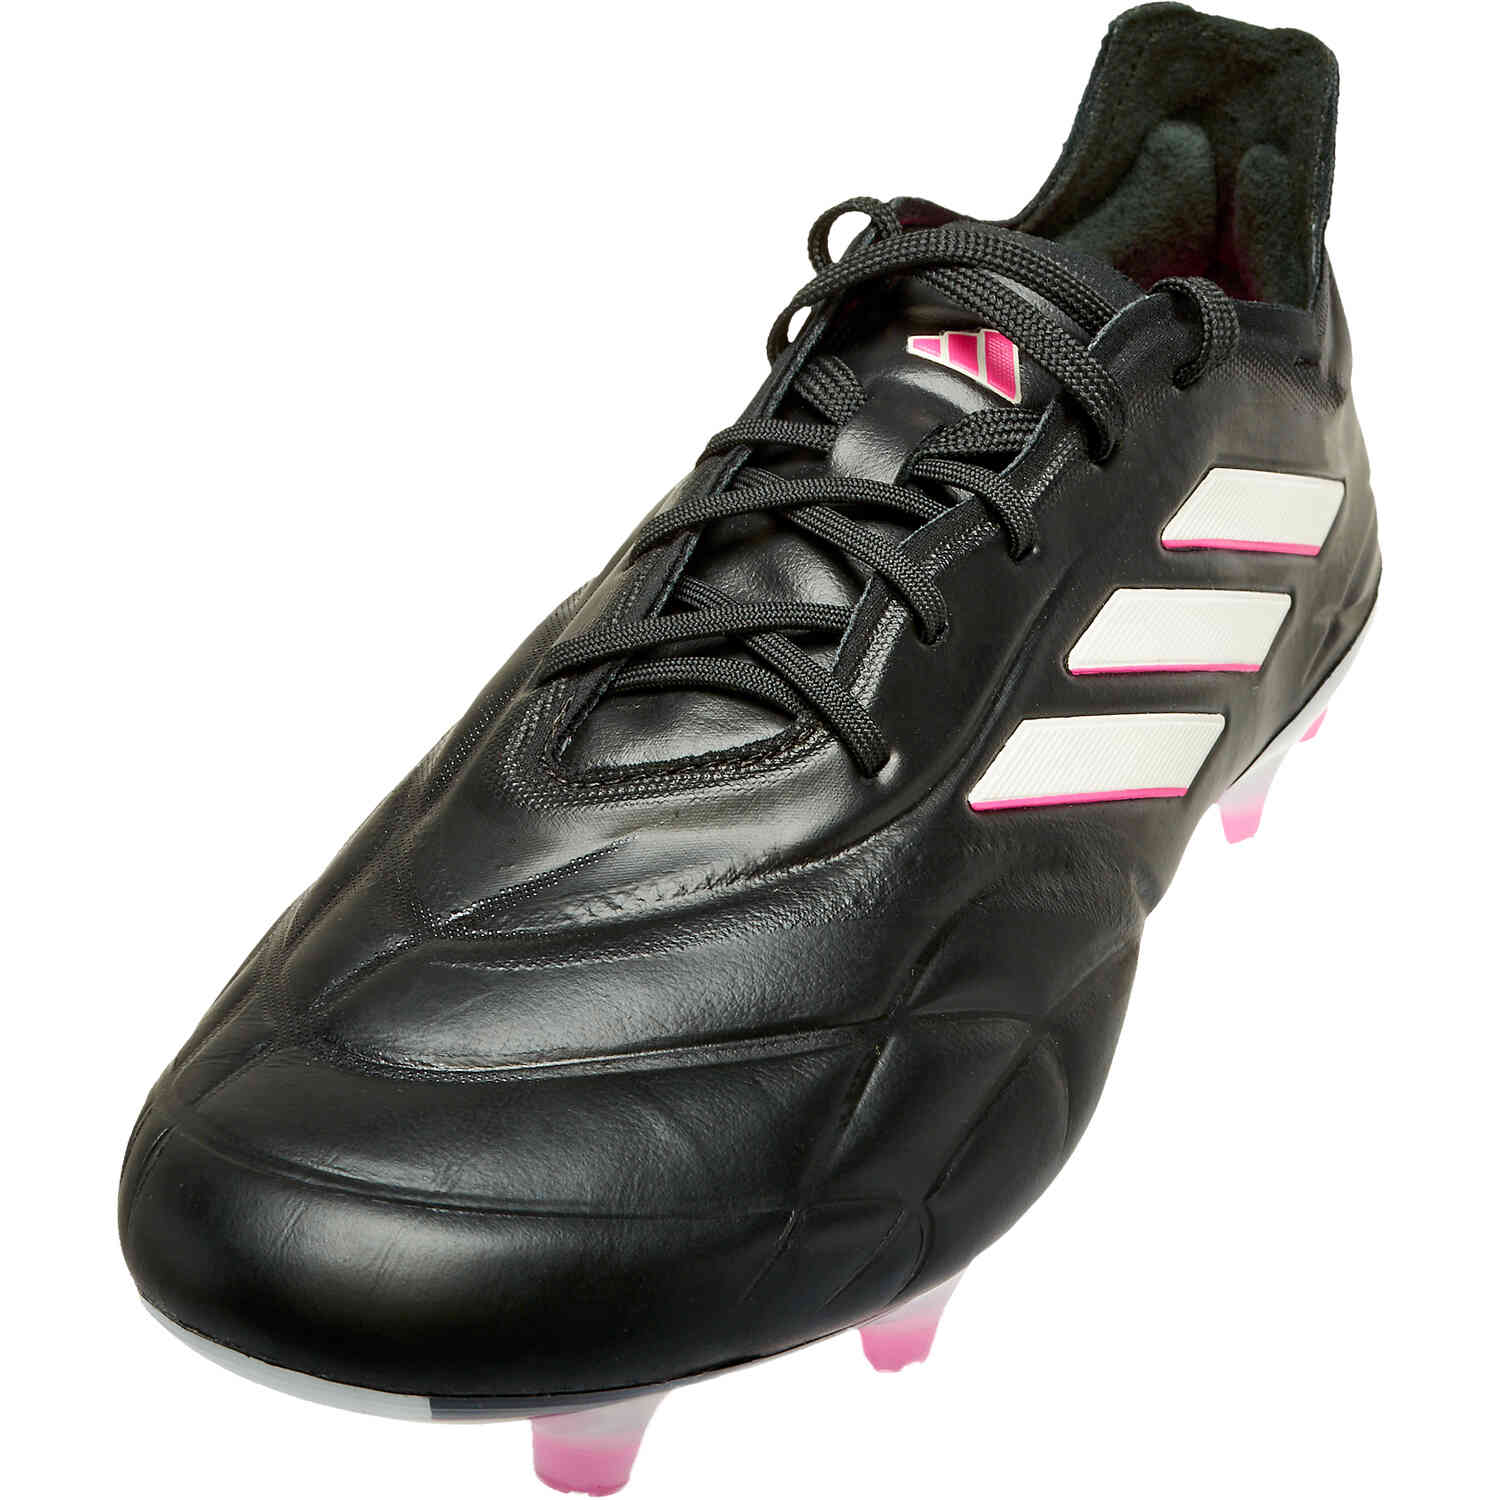 adidas Copa Pure.1 FG - Own Your Football Pack - SoccerPro